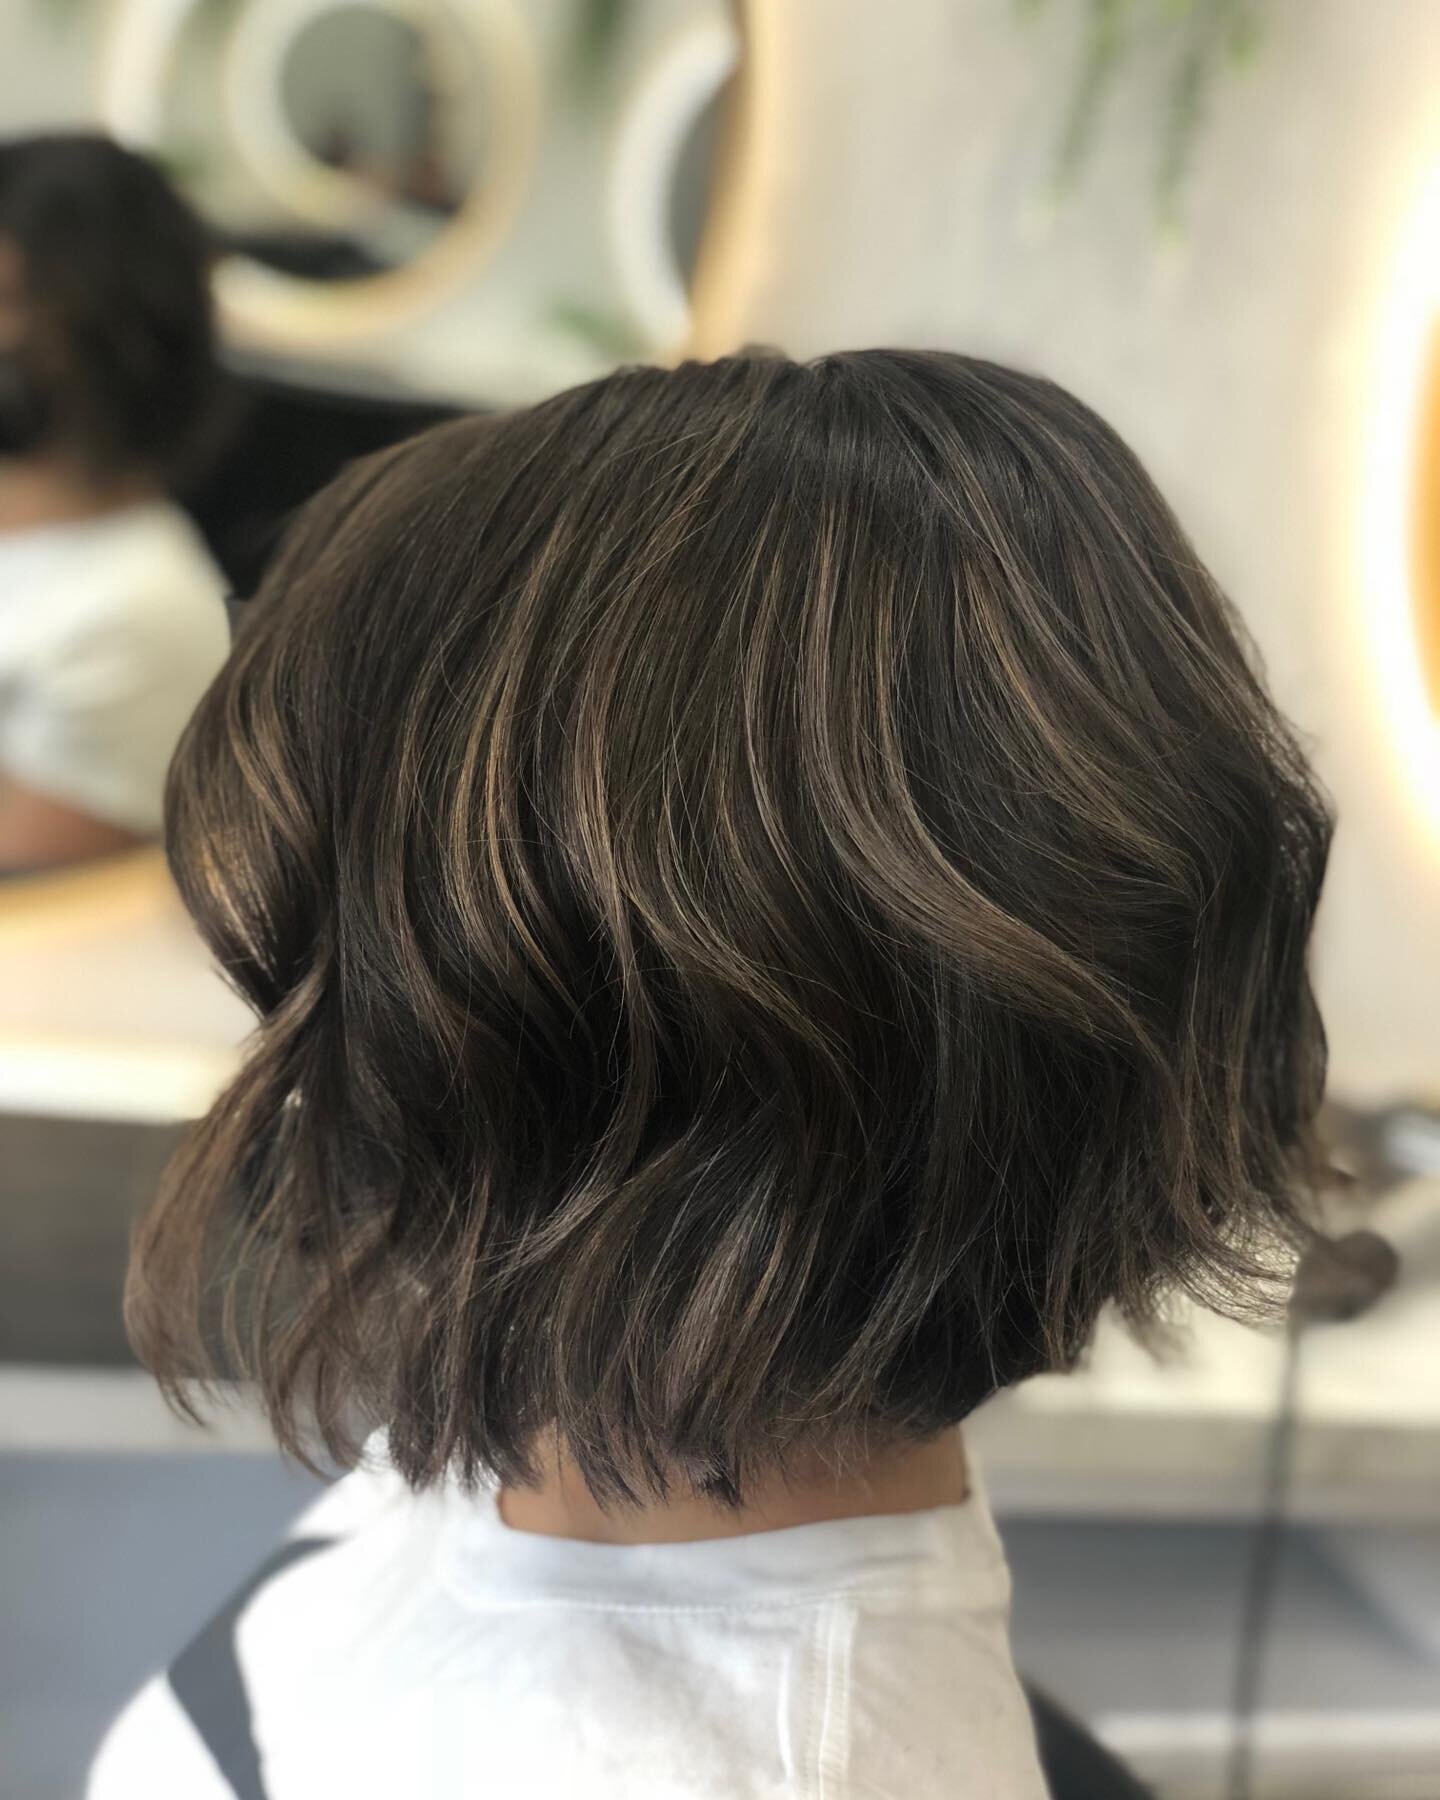 Stylish summer style cut and color on Nat